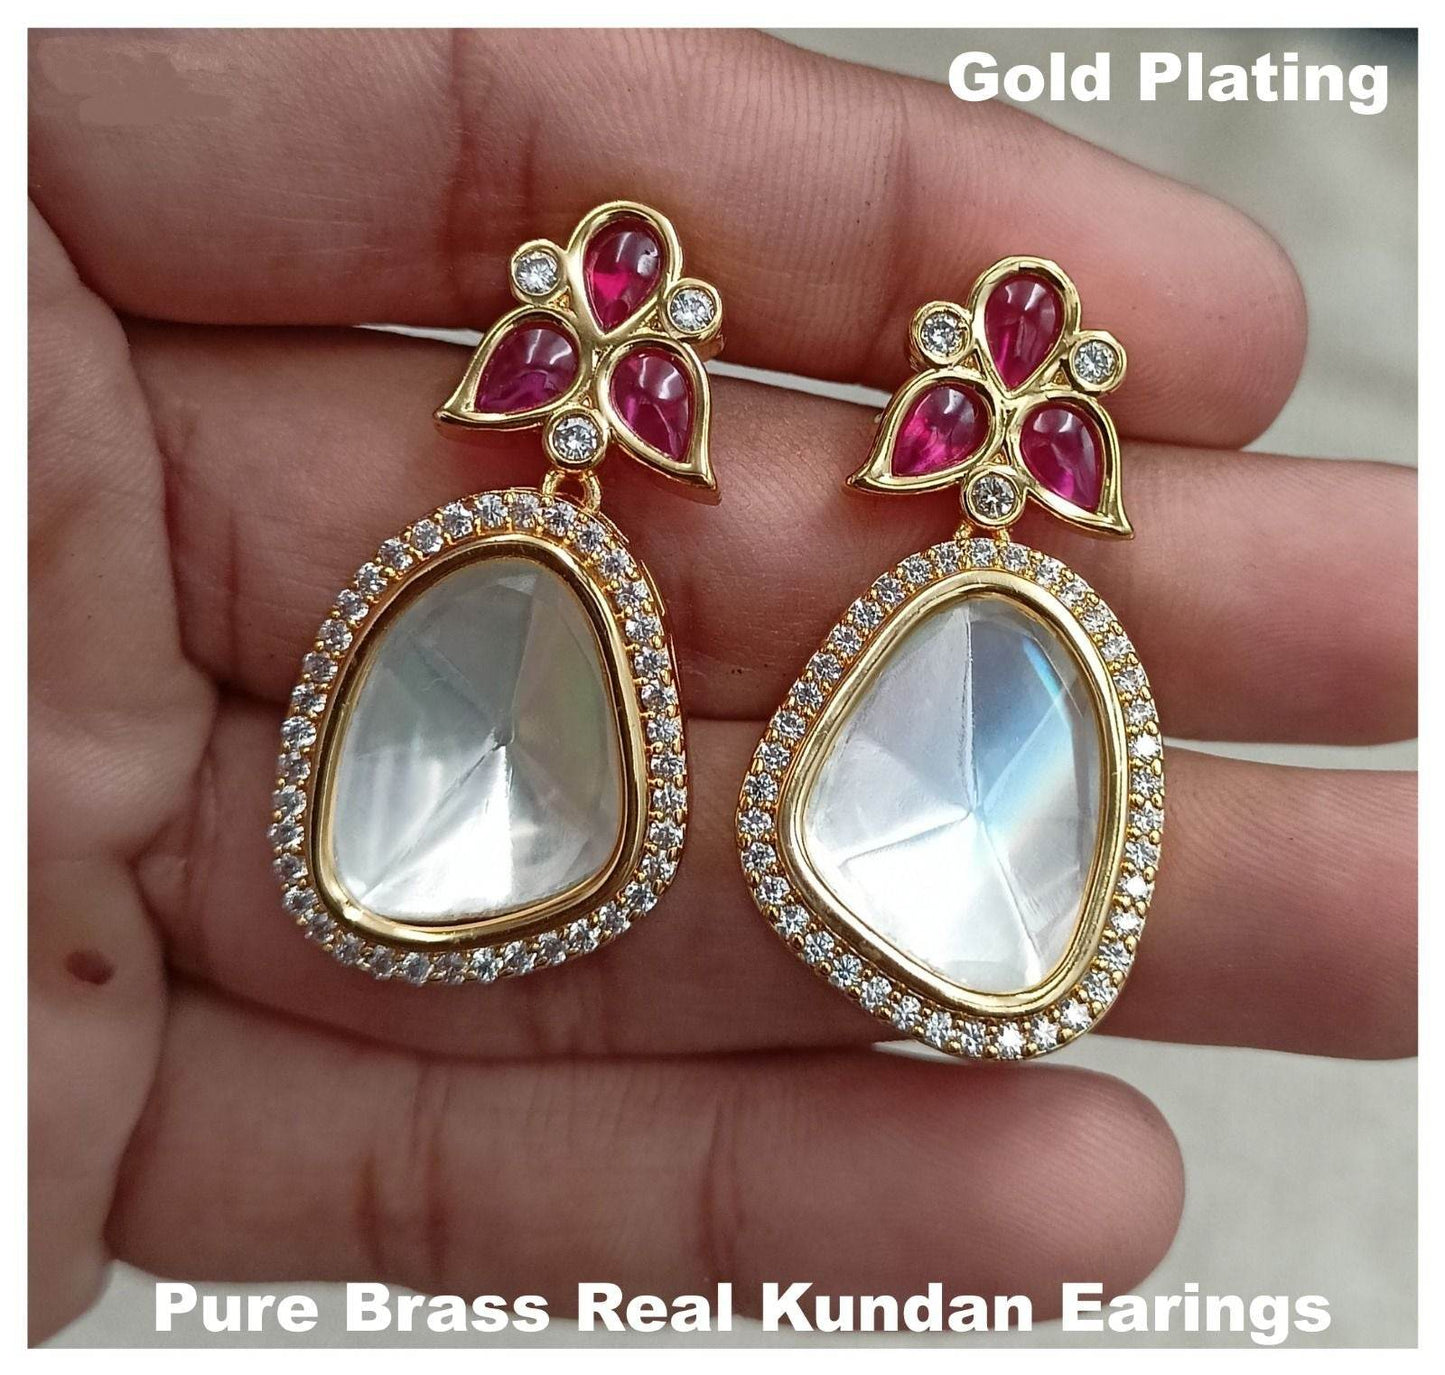 gold plating pure brass real kundan earrings in ruby color